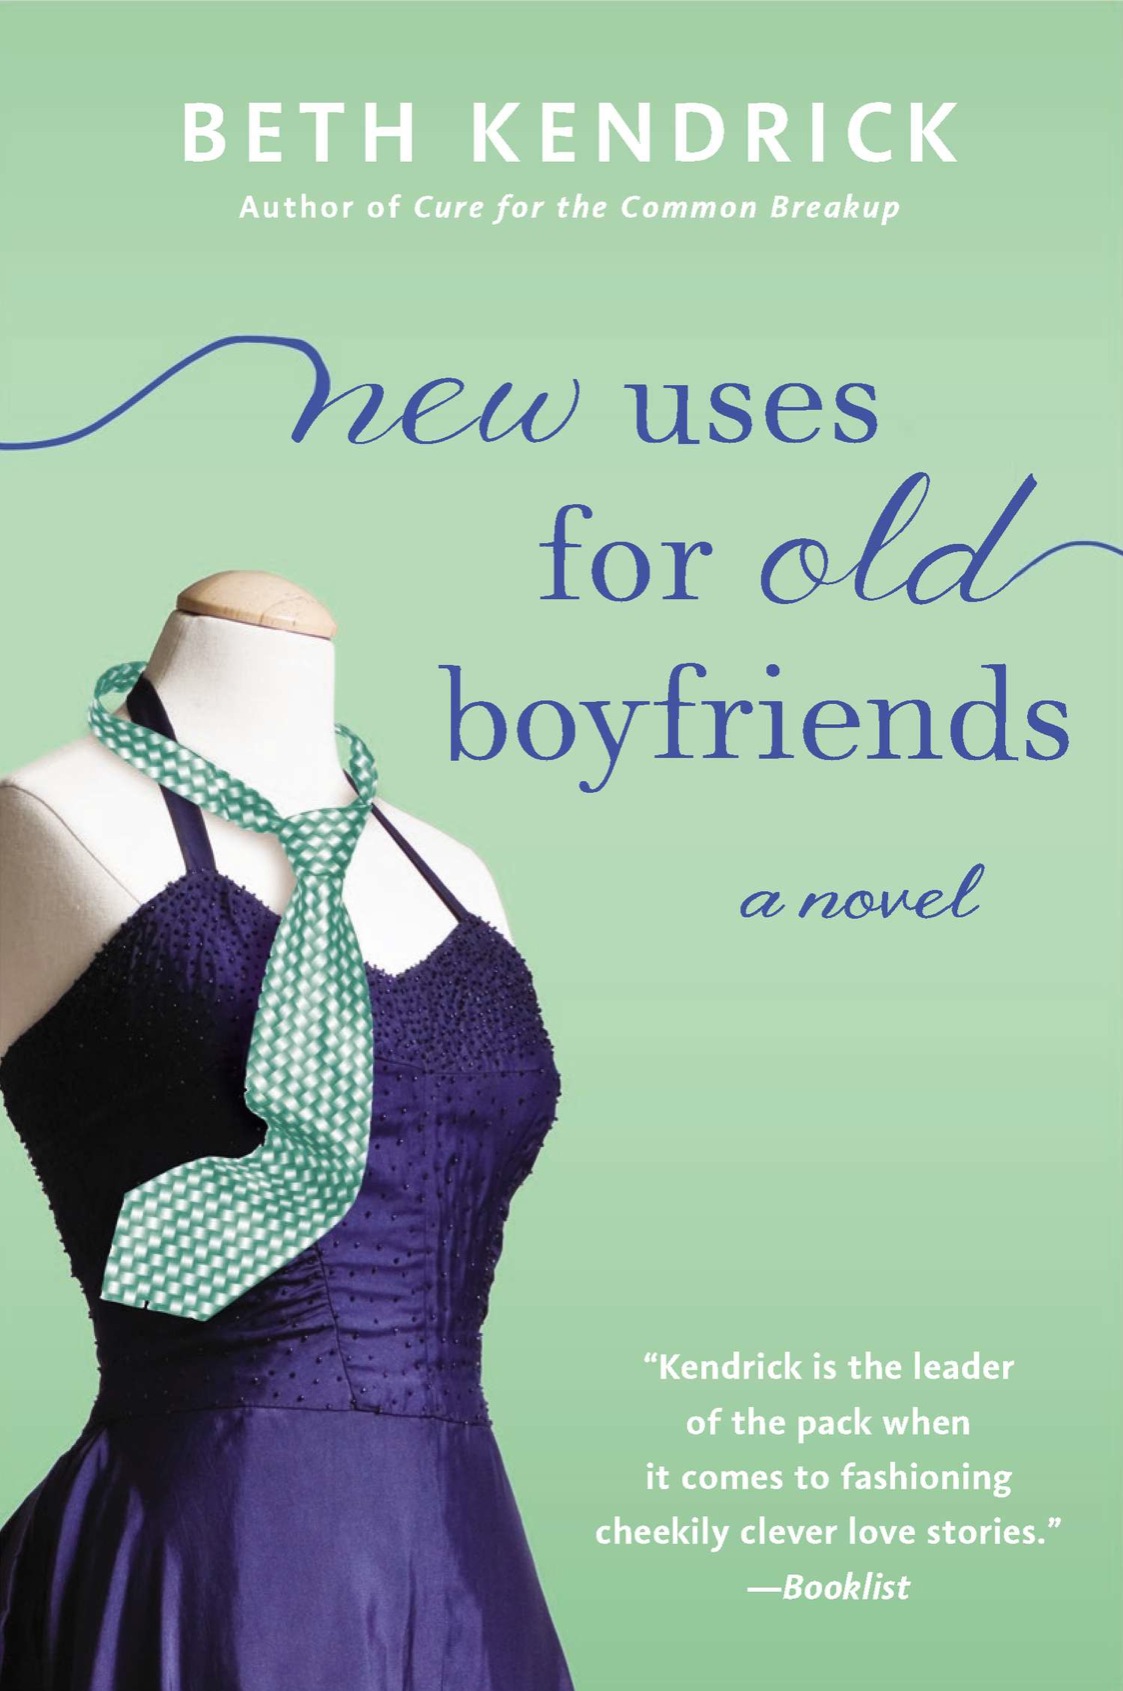 New Uses For Old Boyfriends (2015) by Beth Kendrick